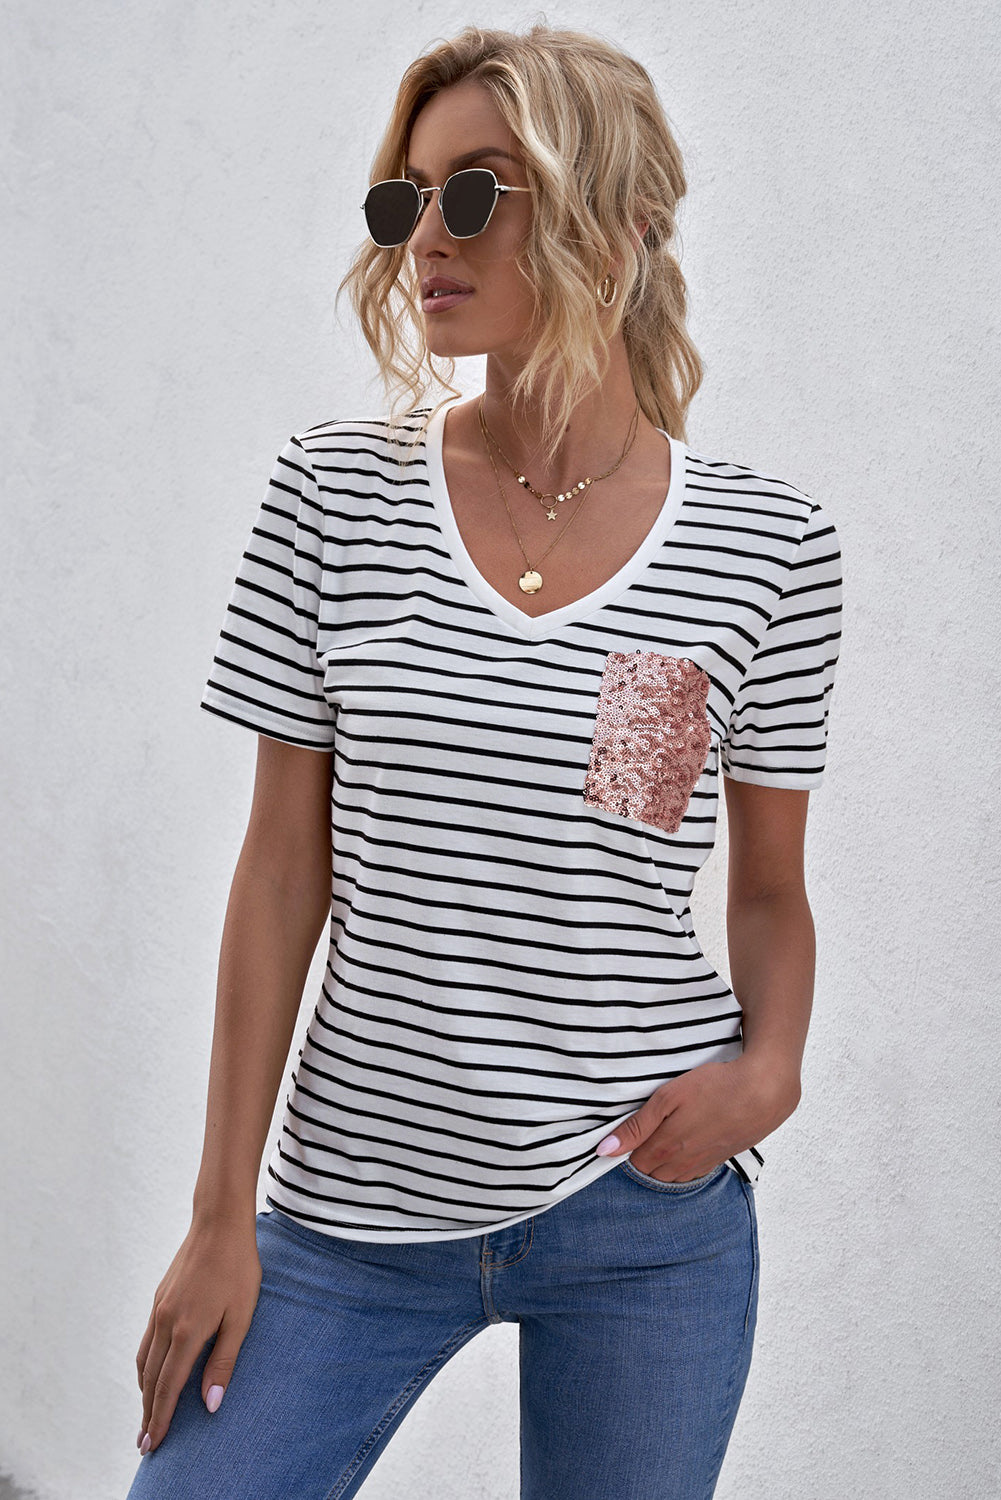 Women's Short Sleeve V Neck White Striped T-shirt with Patch Pocket